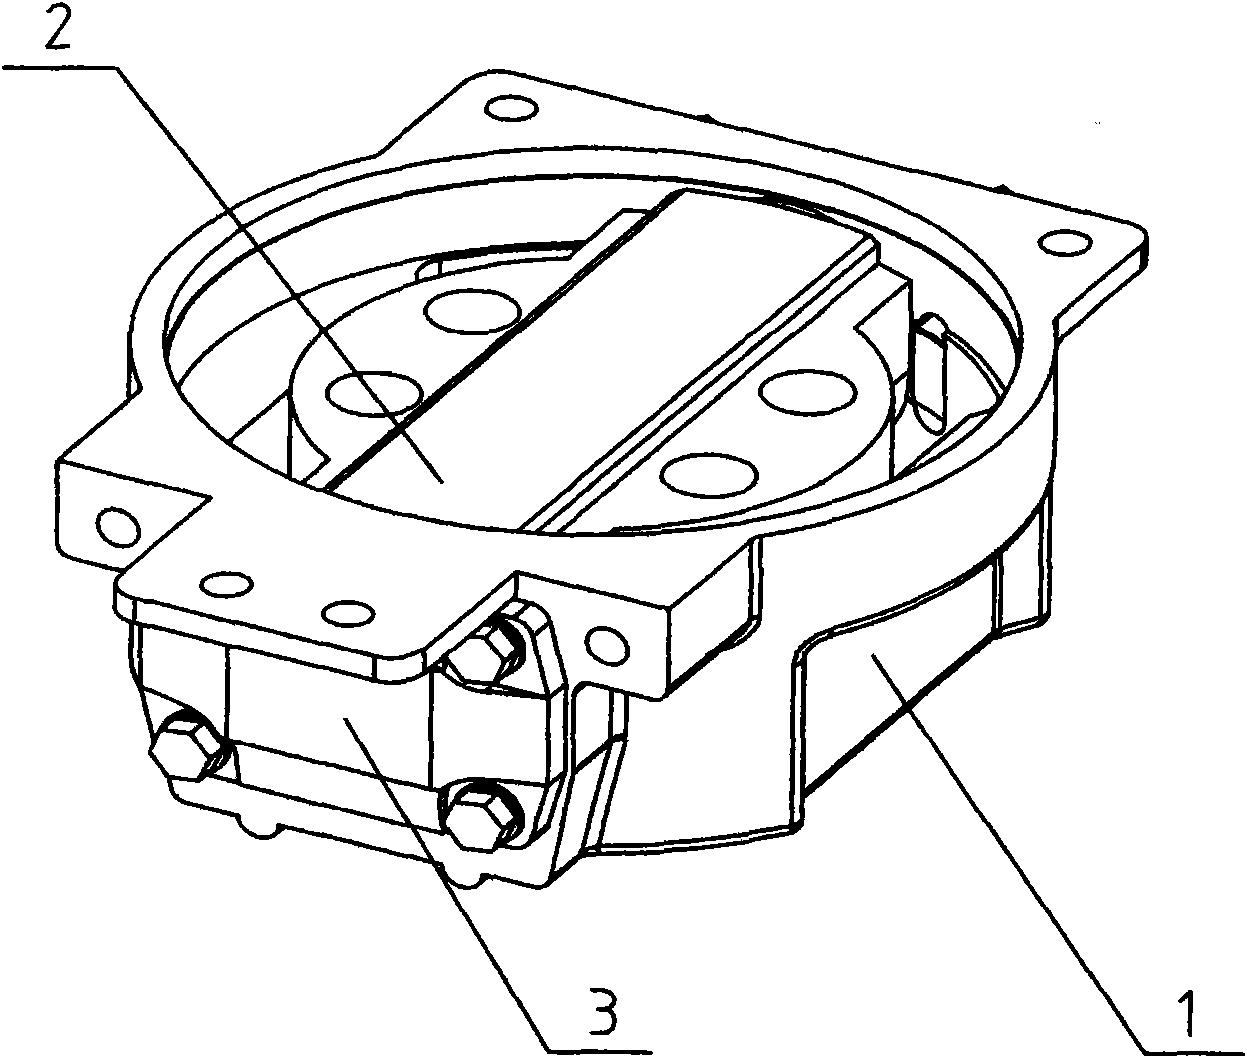 Compact centring device